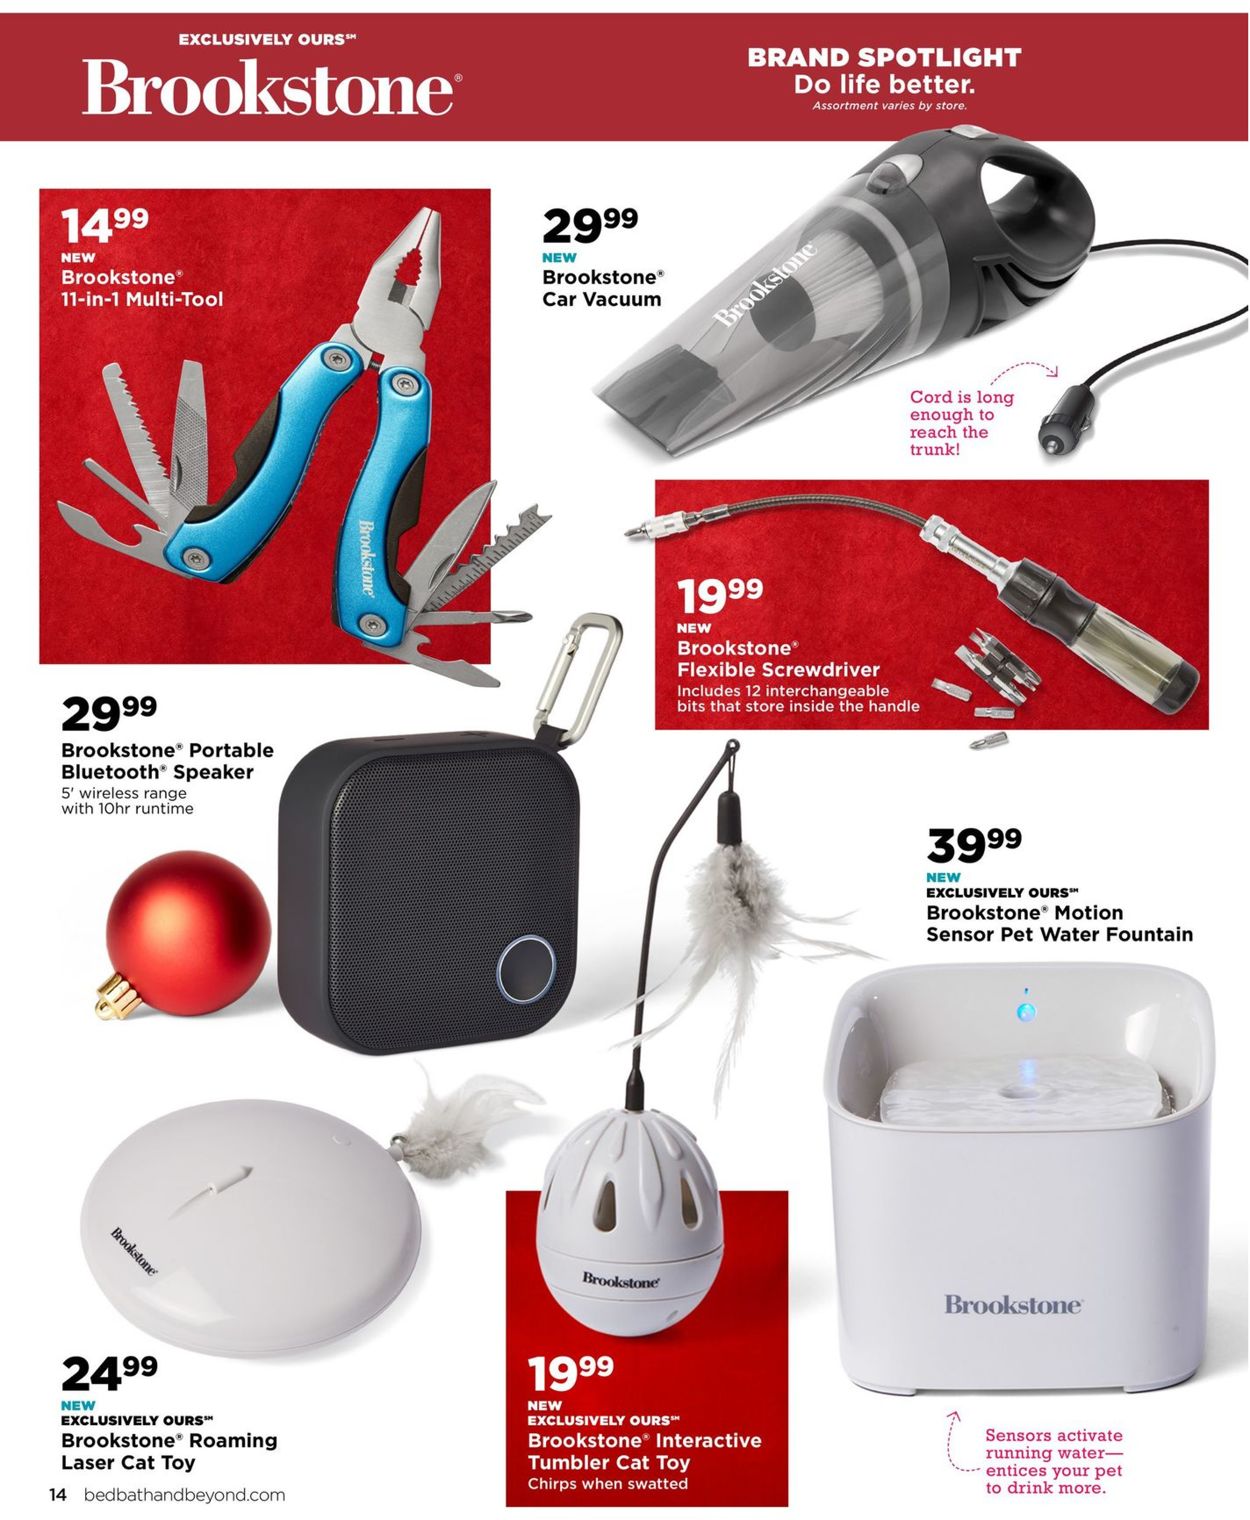 Catalogue Bed Bath and Beyond - Holiday Ad 2019 from 12/08/2019